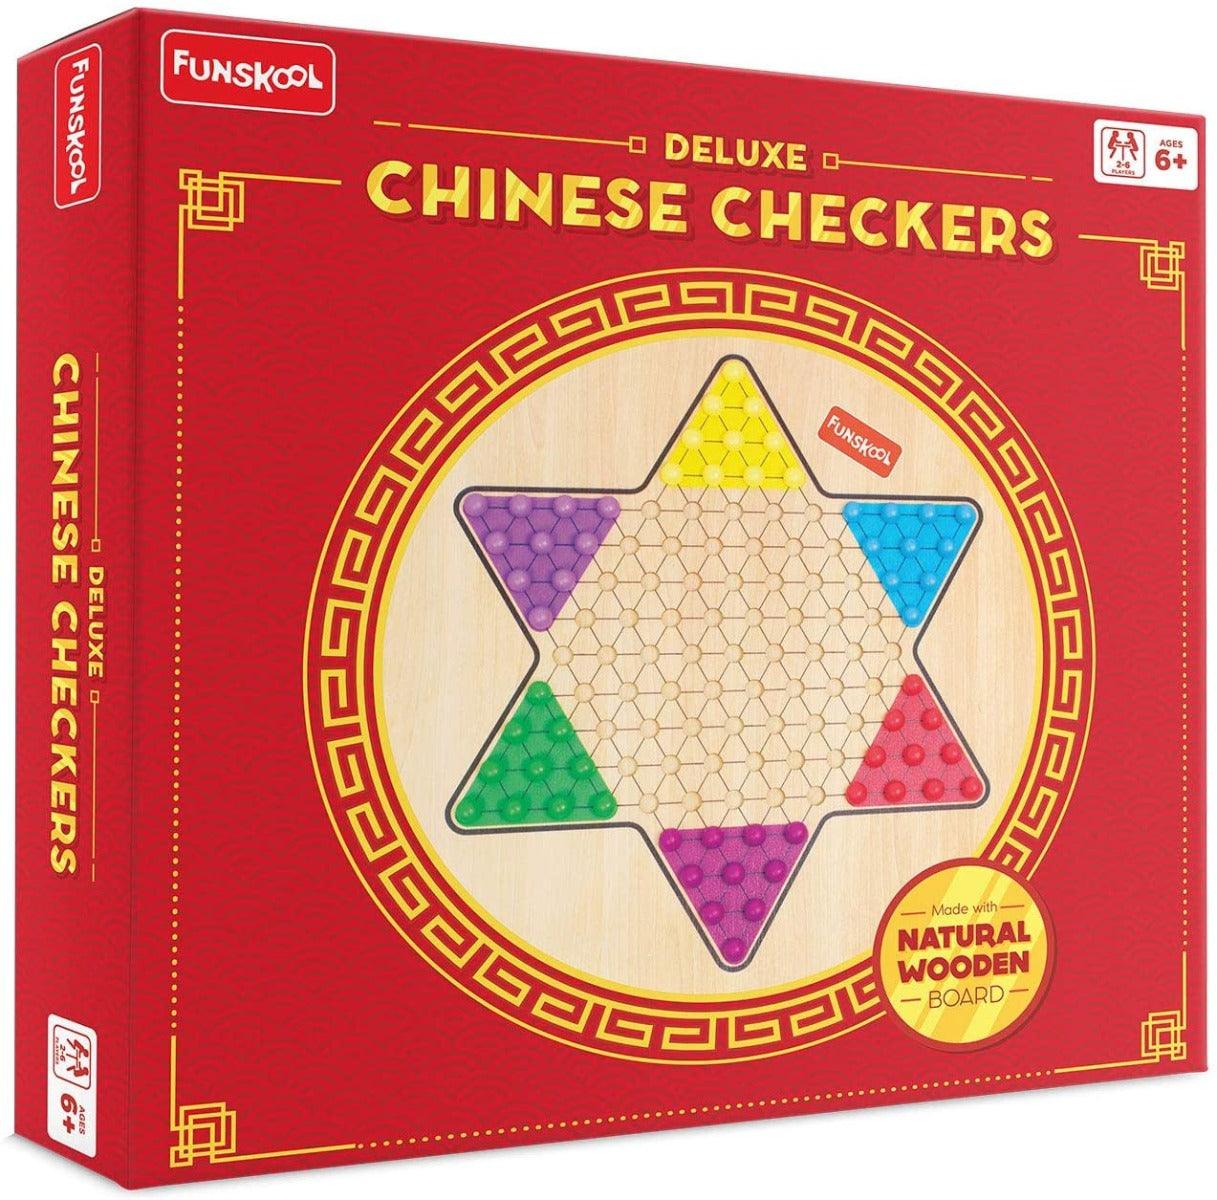 Funskool Deluxe Chinese Checkers